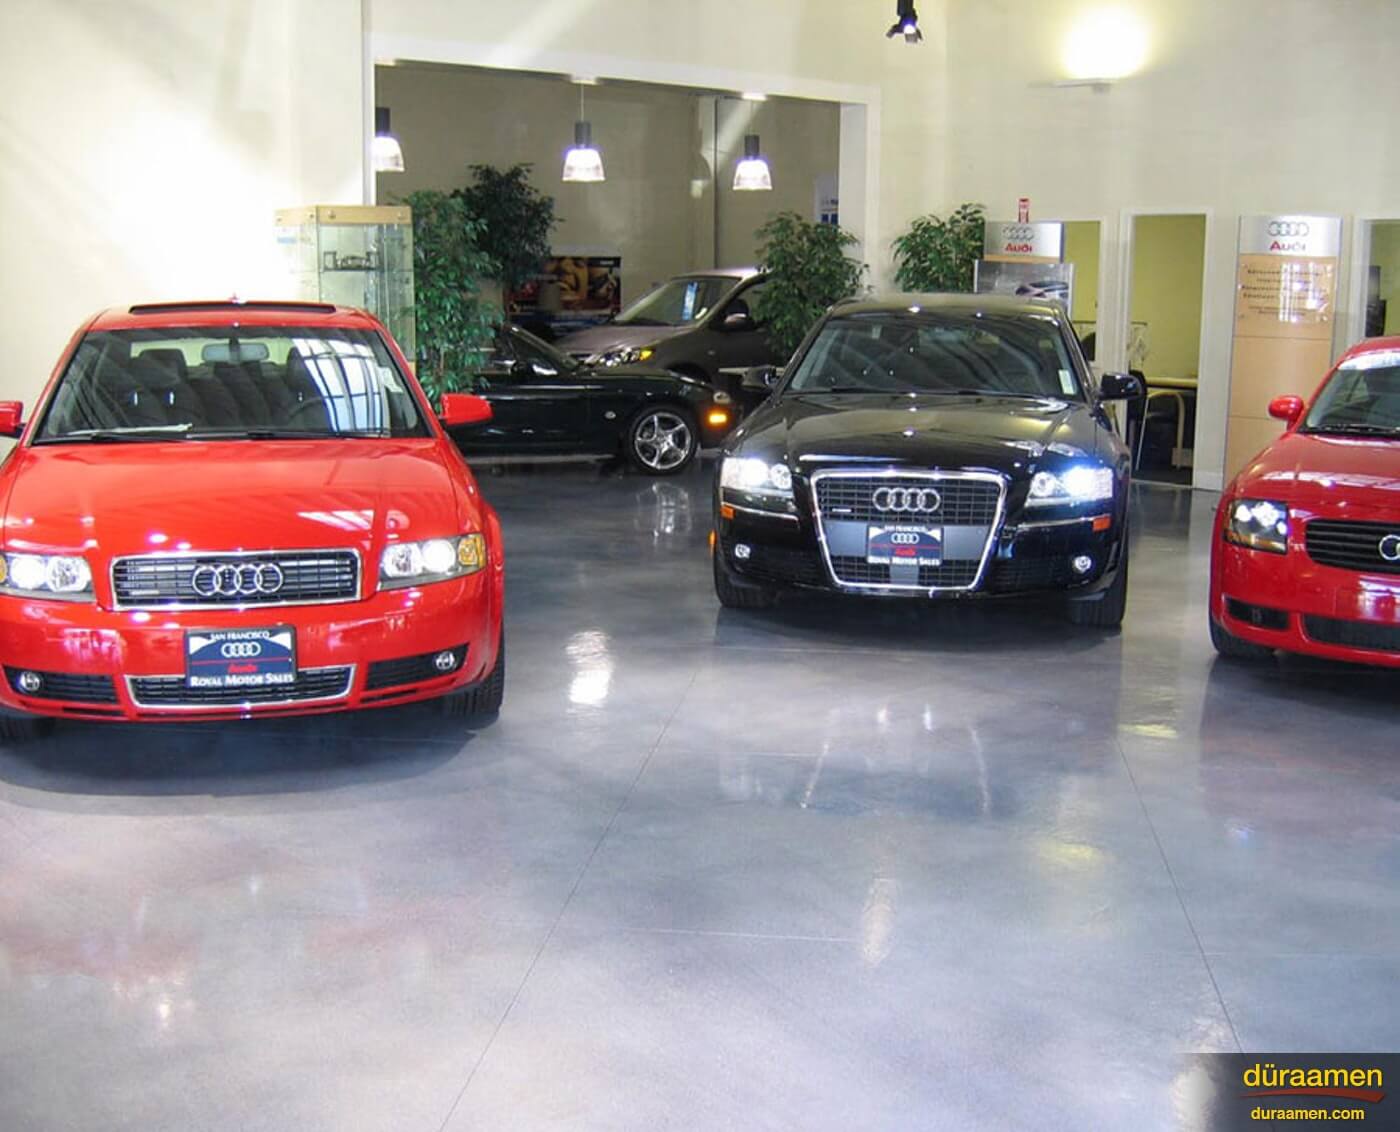 Want to make a car shine Park in on beautiful resinous flooring from Duraamen Auto Dealer Showroom | Duraamen Engineered Products Inc